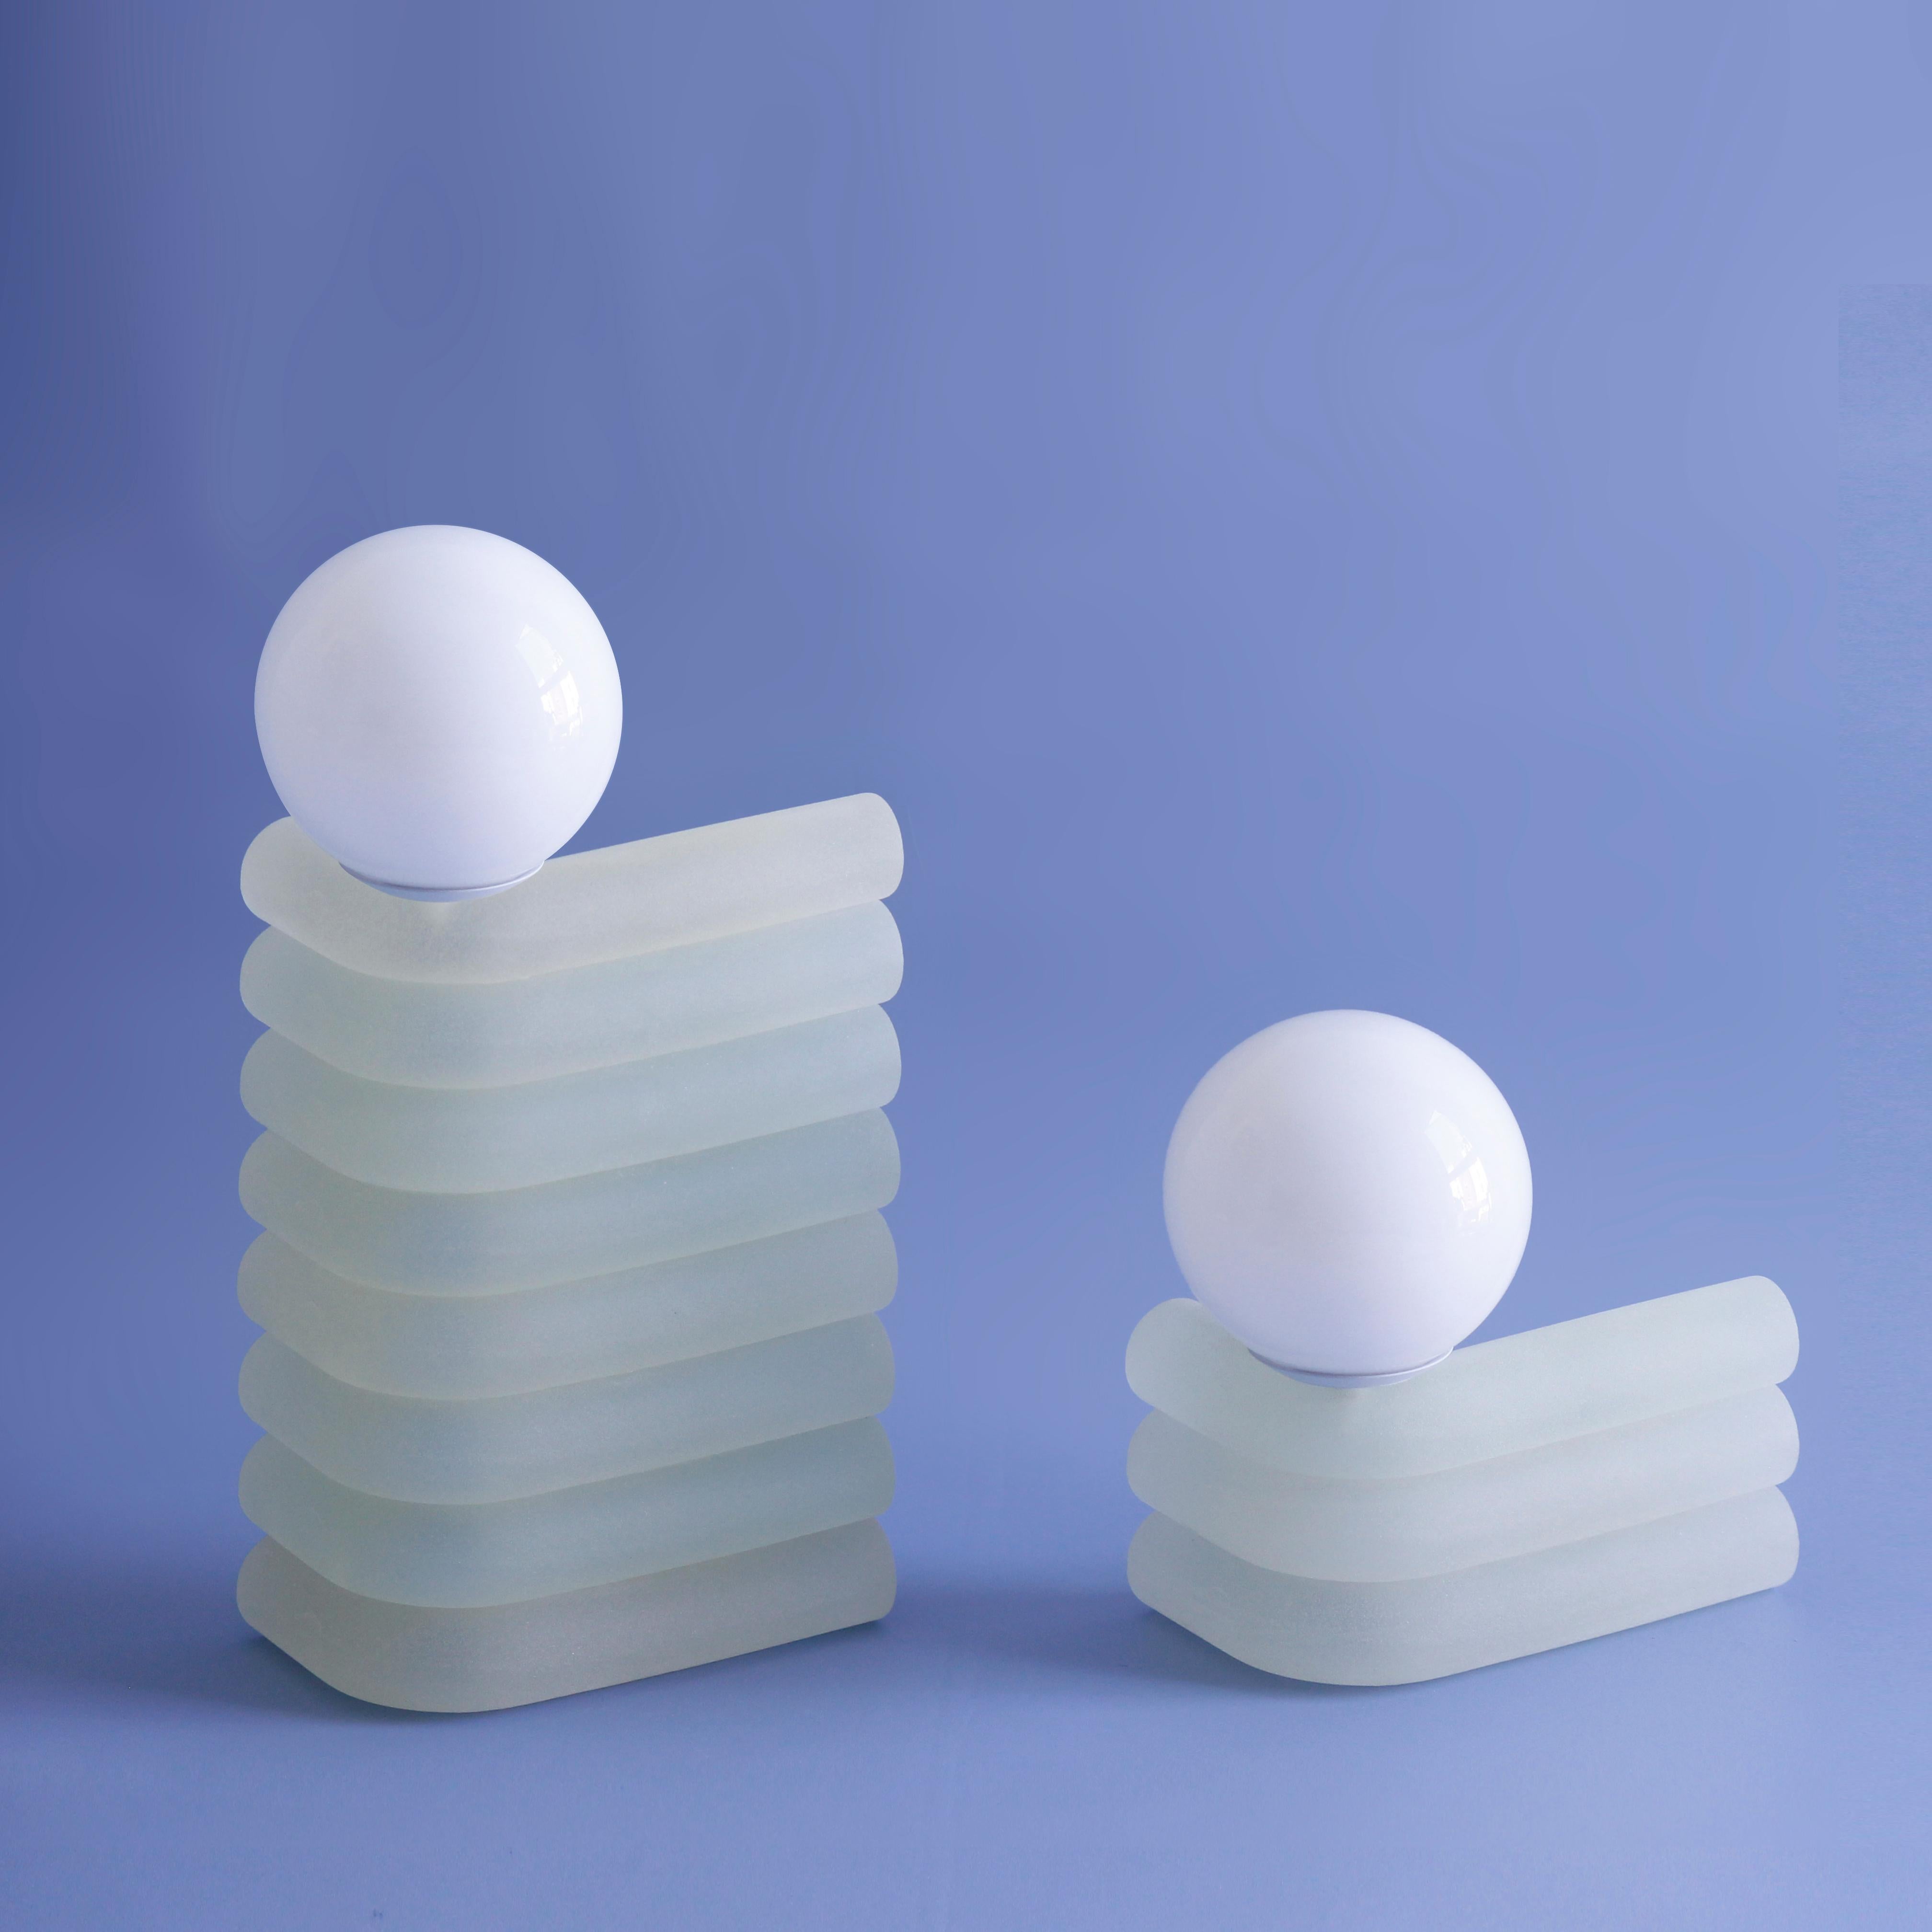 Set of 2 Aloe Elio lamp by Soft-Geometry
Materials: Voice-controlled smart lamp, hand-cast in textured resin
Dimensions: W27.94 x D17.78 x H45.73 cm and W27.94 x D17.78 x H22.86 cm

Voice-controlled smart lamp

Inspired by an informal photo